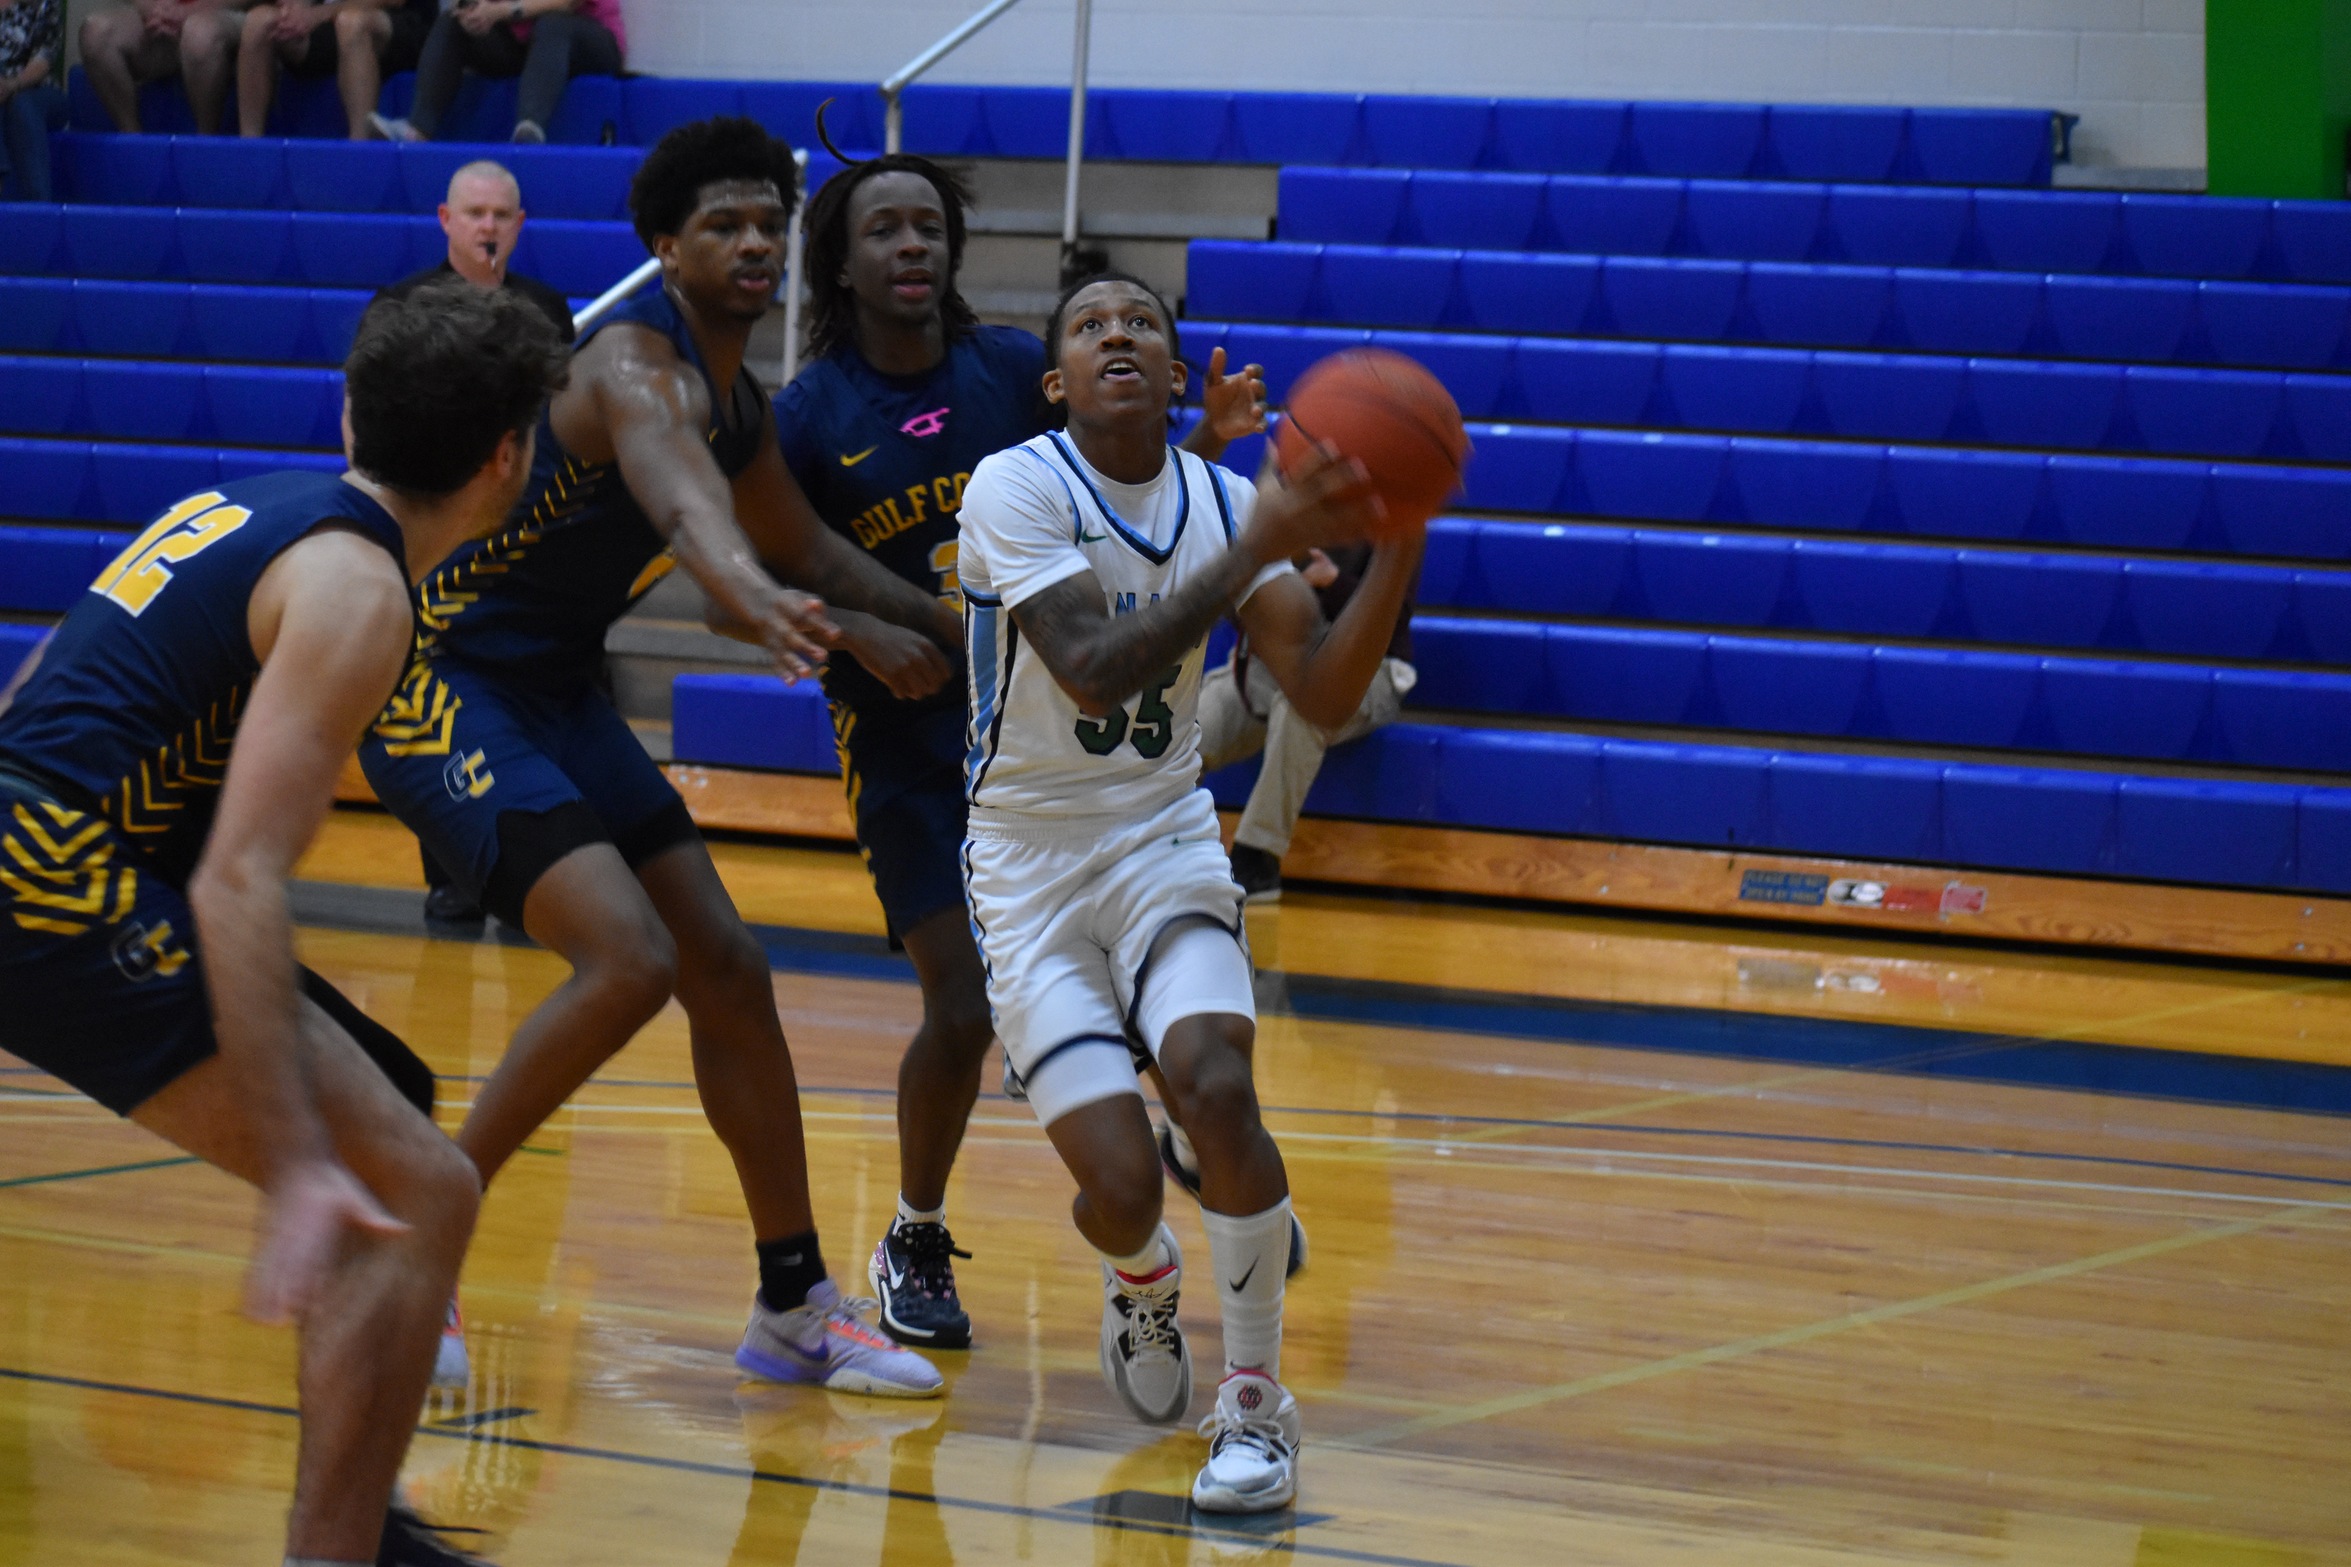 Manatees Bounce Back With a 69-65 Win Over Pensacola